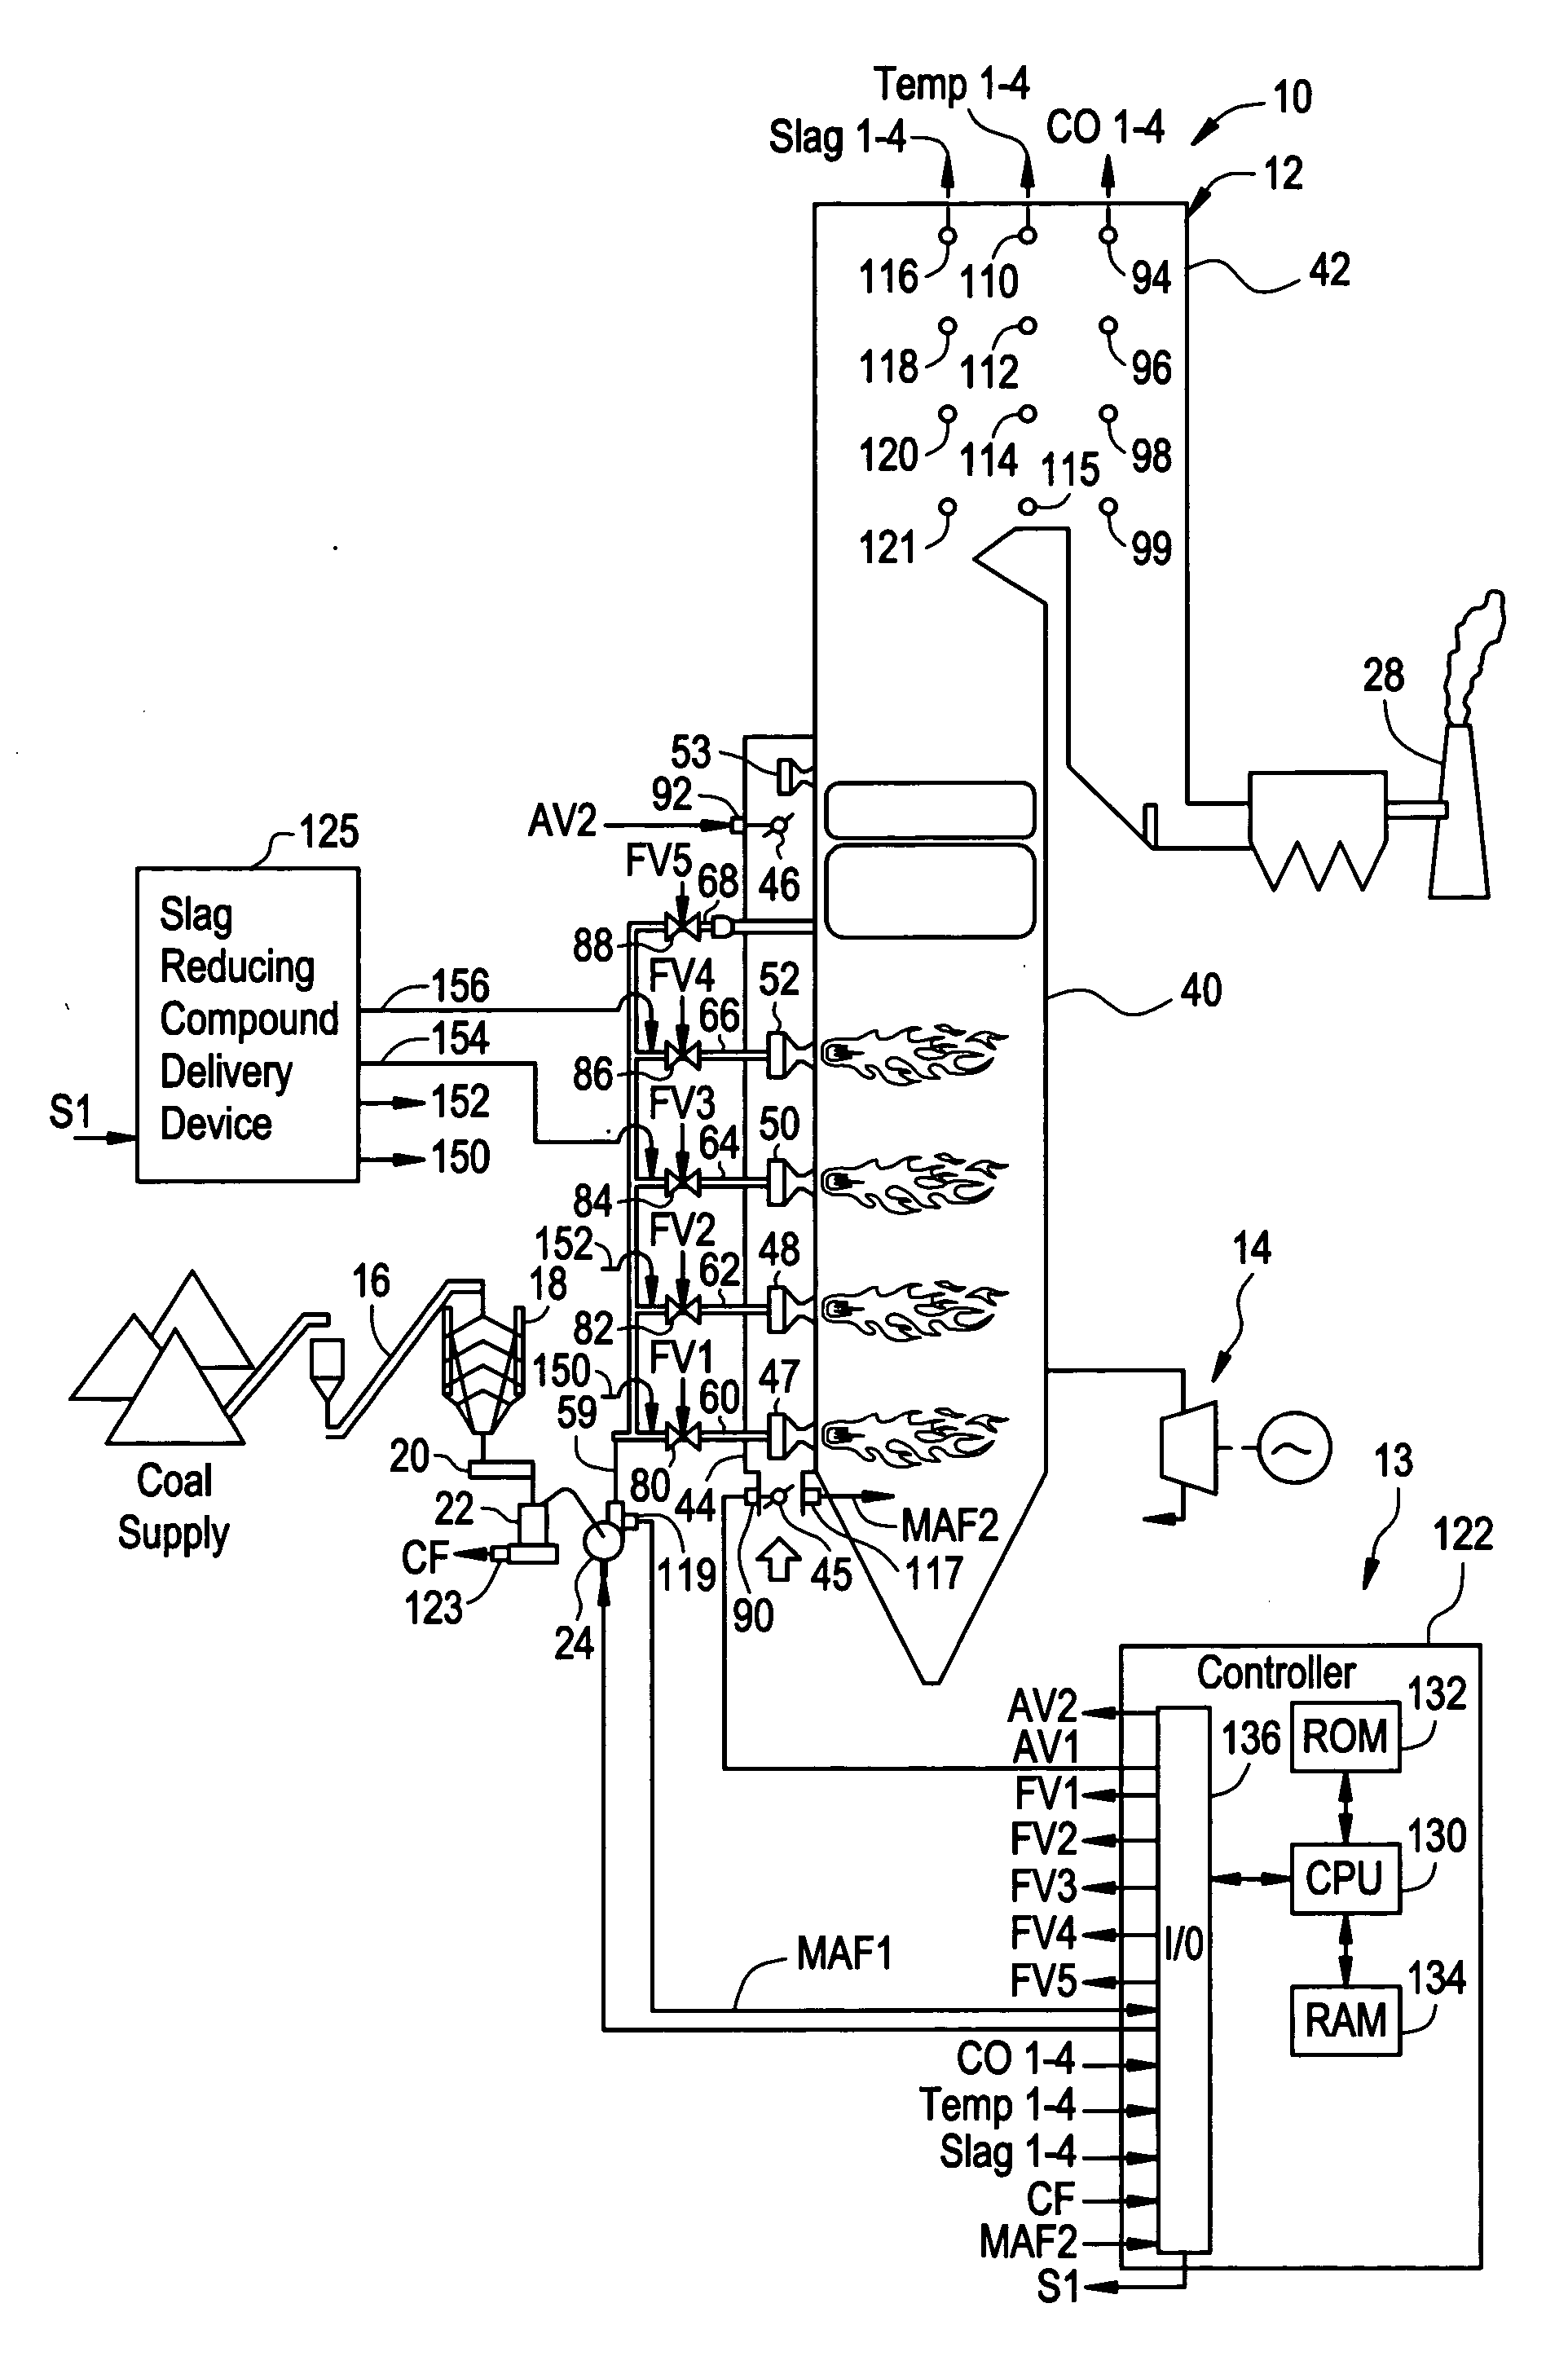 System and method for decreasing a rate of slag formation at predetermined locations in a boiler system